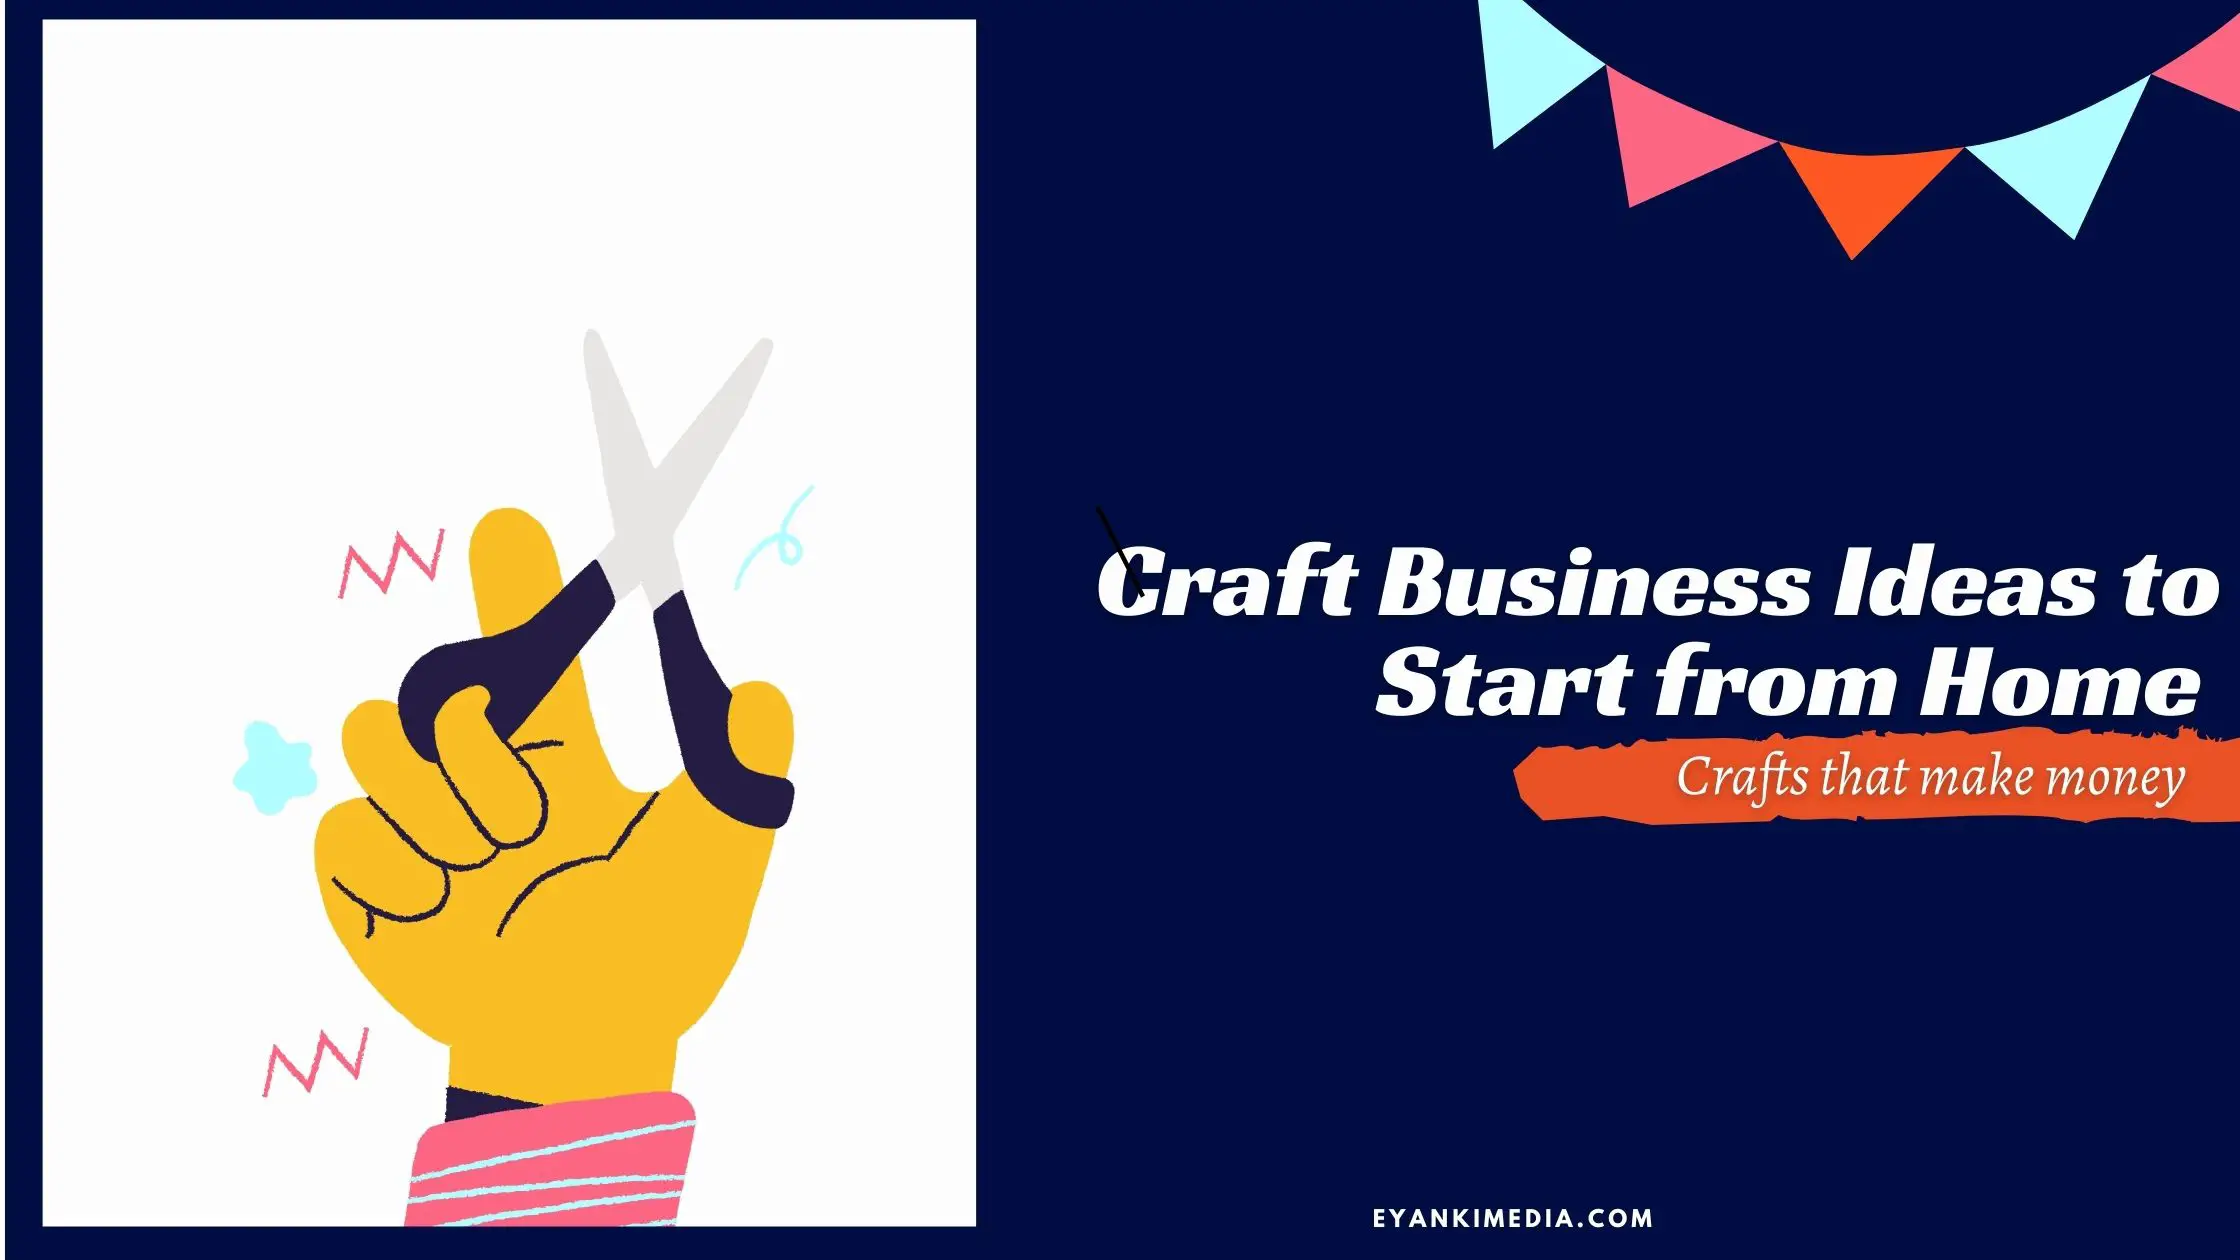 Craft Business Ideas to Start from Home